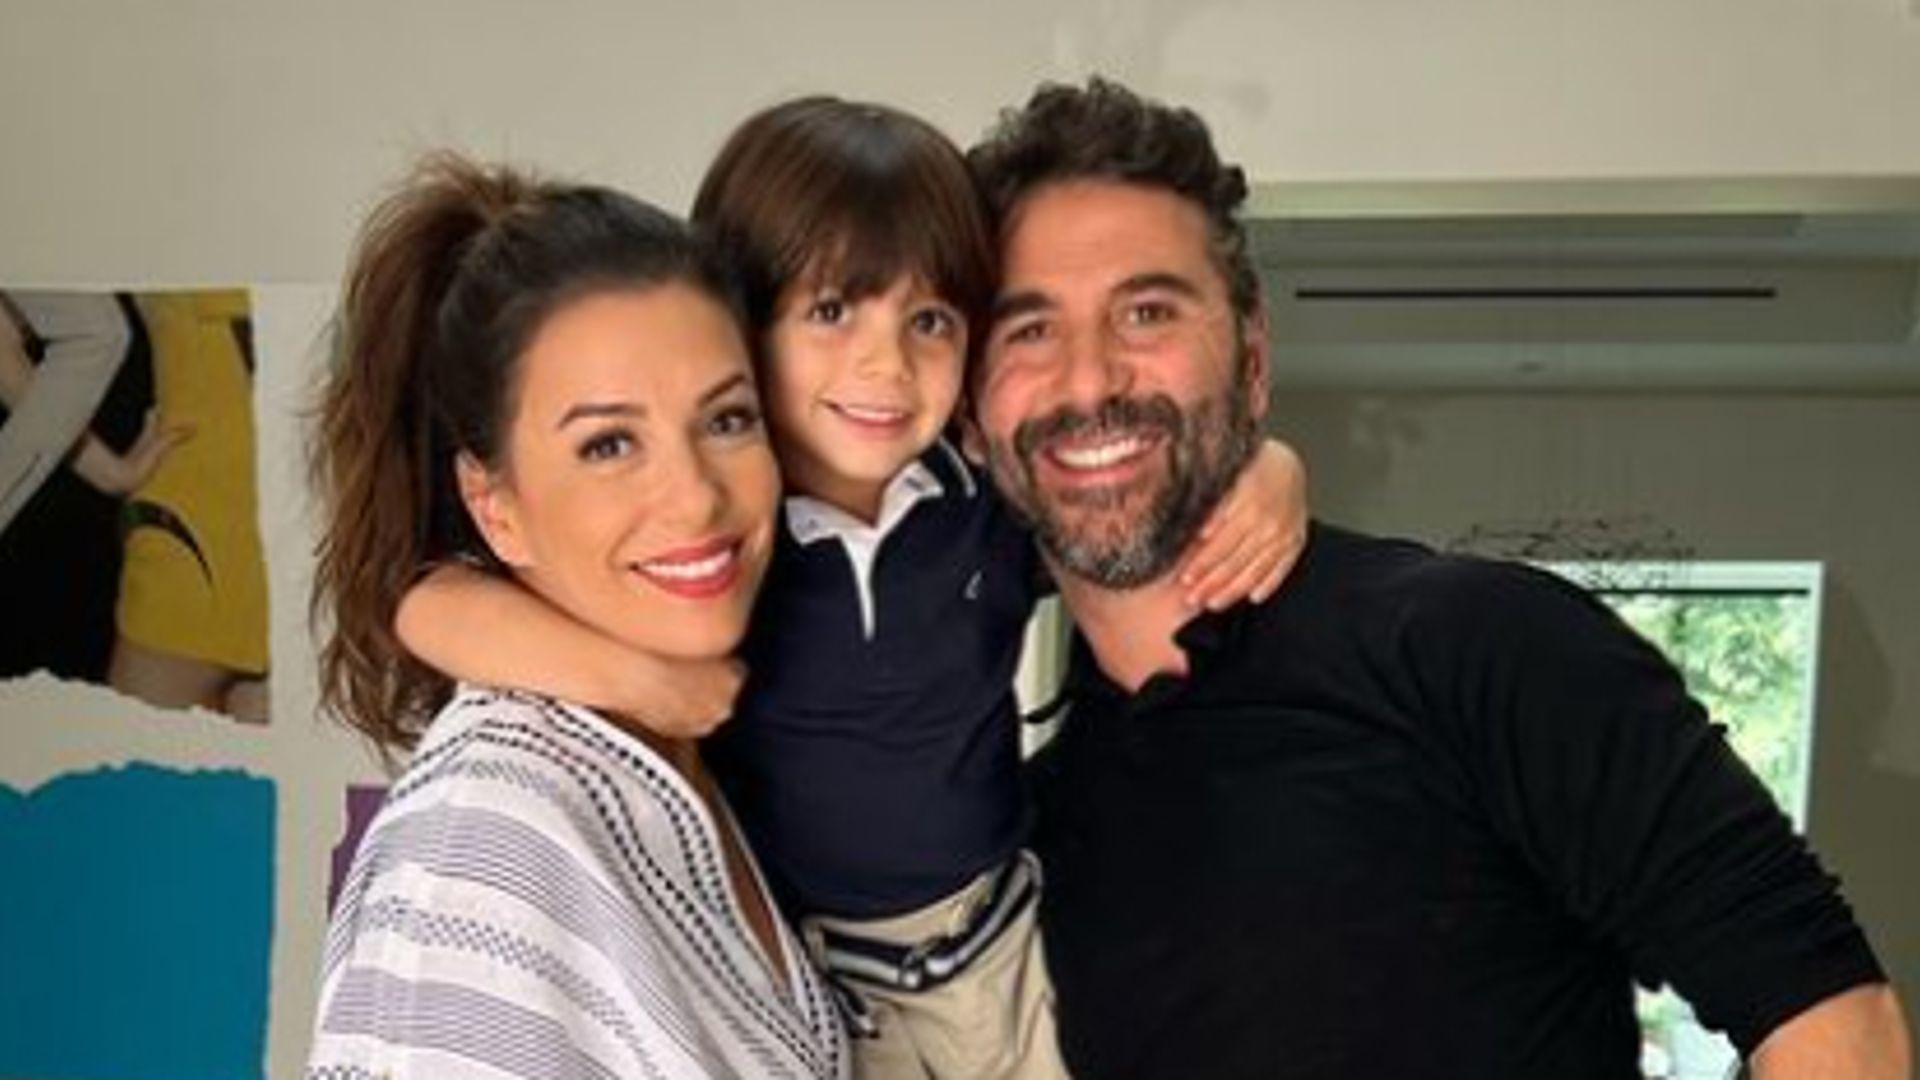 Eva Longoria and her husband with their son balancing between their heads